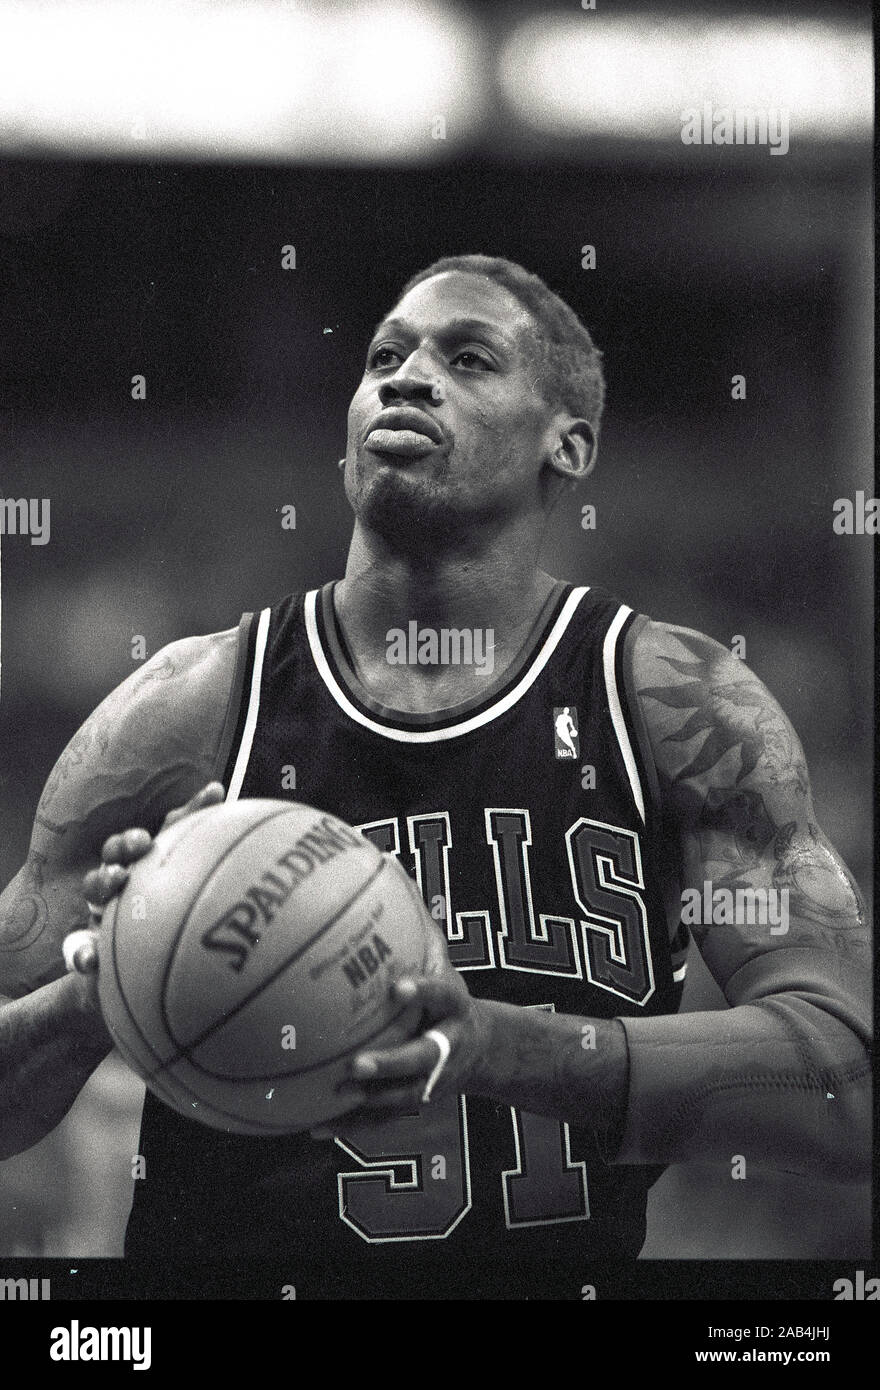 Chicago Bulls Dennis Rodman at the free throw line during basketball game action against the Boston Celtics at the Fleet Center in Boston Ma USA 1997 season photo by biil belknap Stock Photo